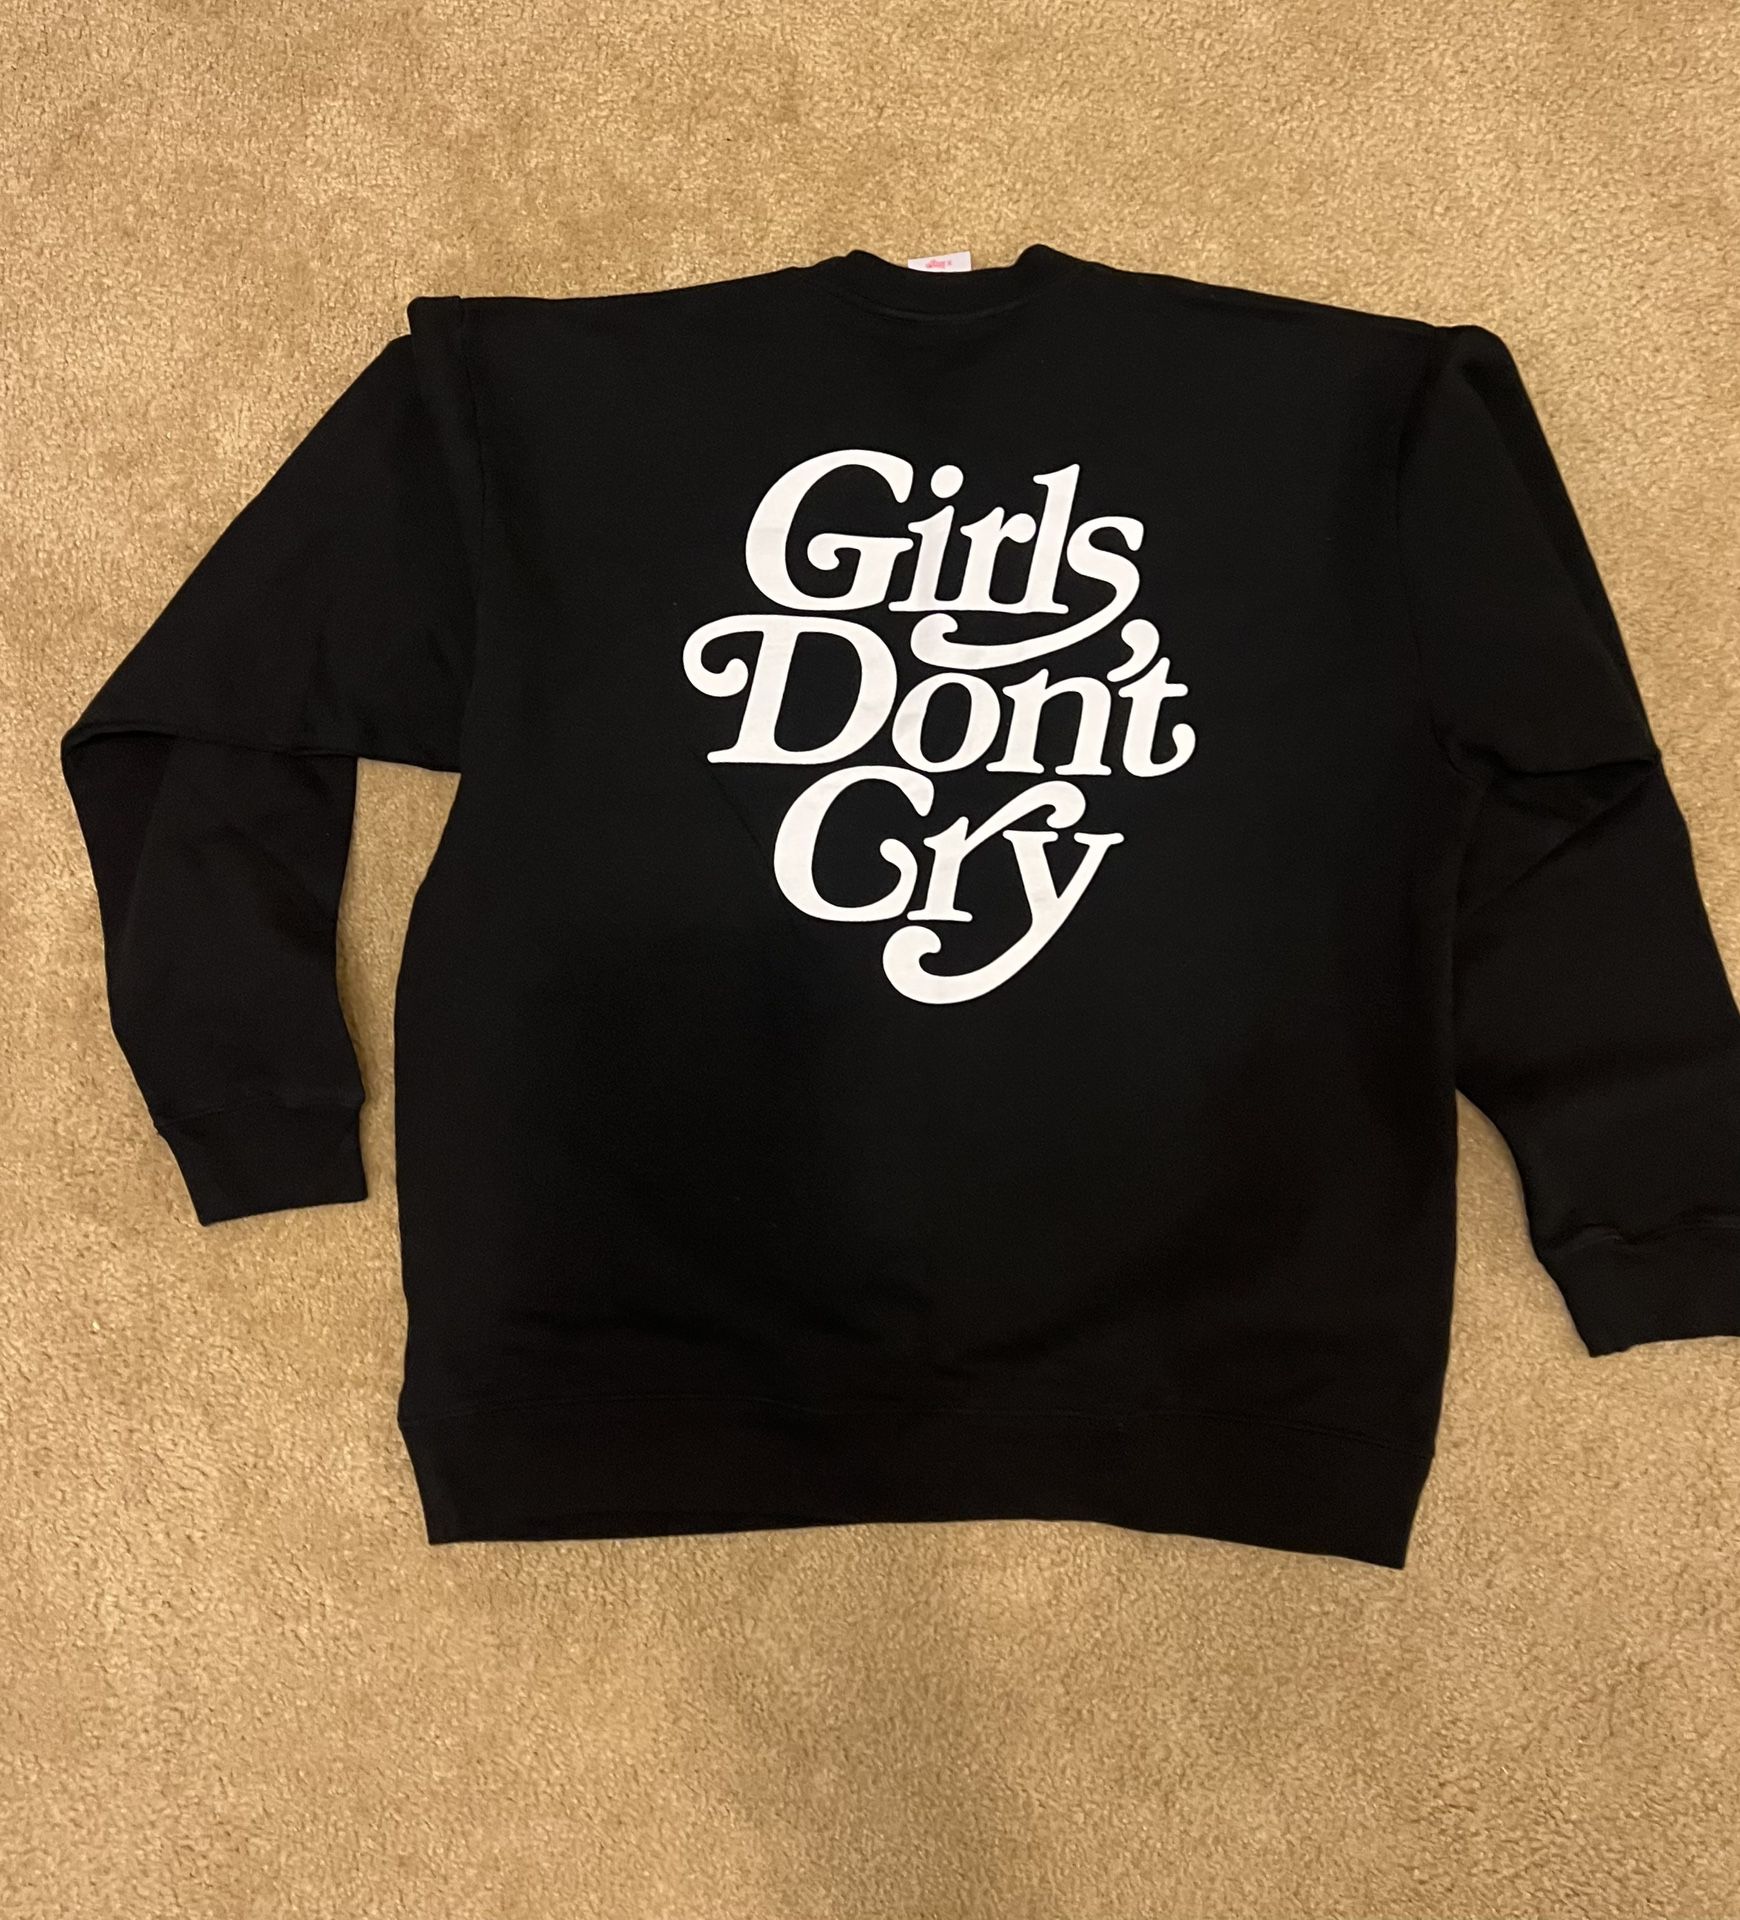 Verdy Coachella Weekend 1 Exclusive Crewneck Girls Don't Cry